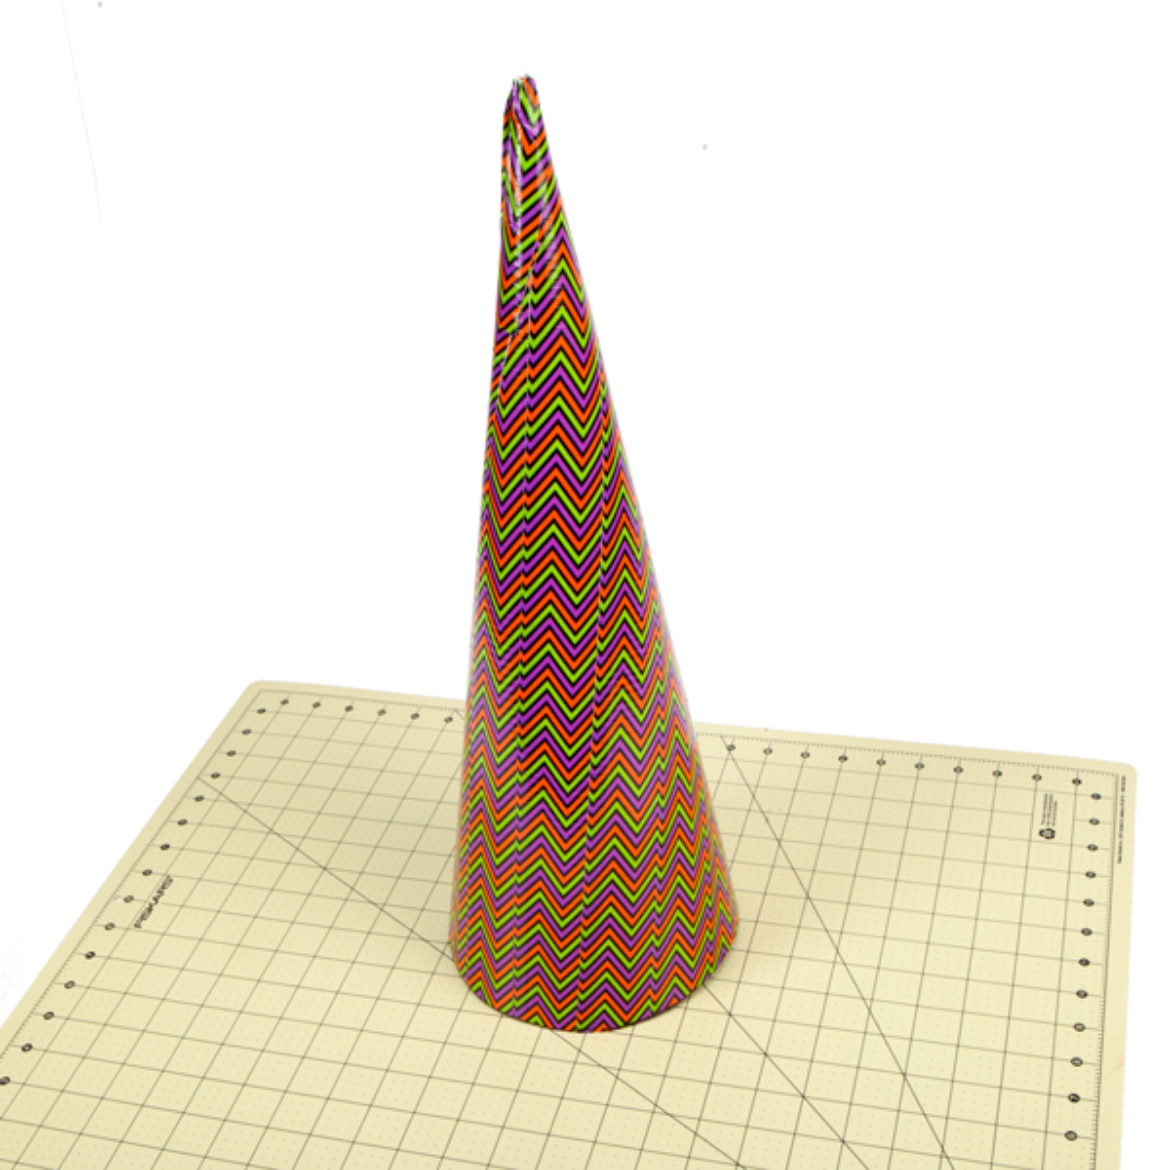 Form the poster board from previous step into a cone shape and secure with Duck Tape